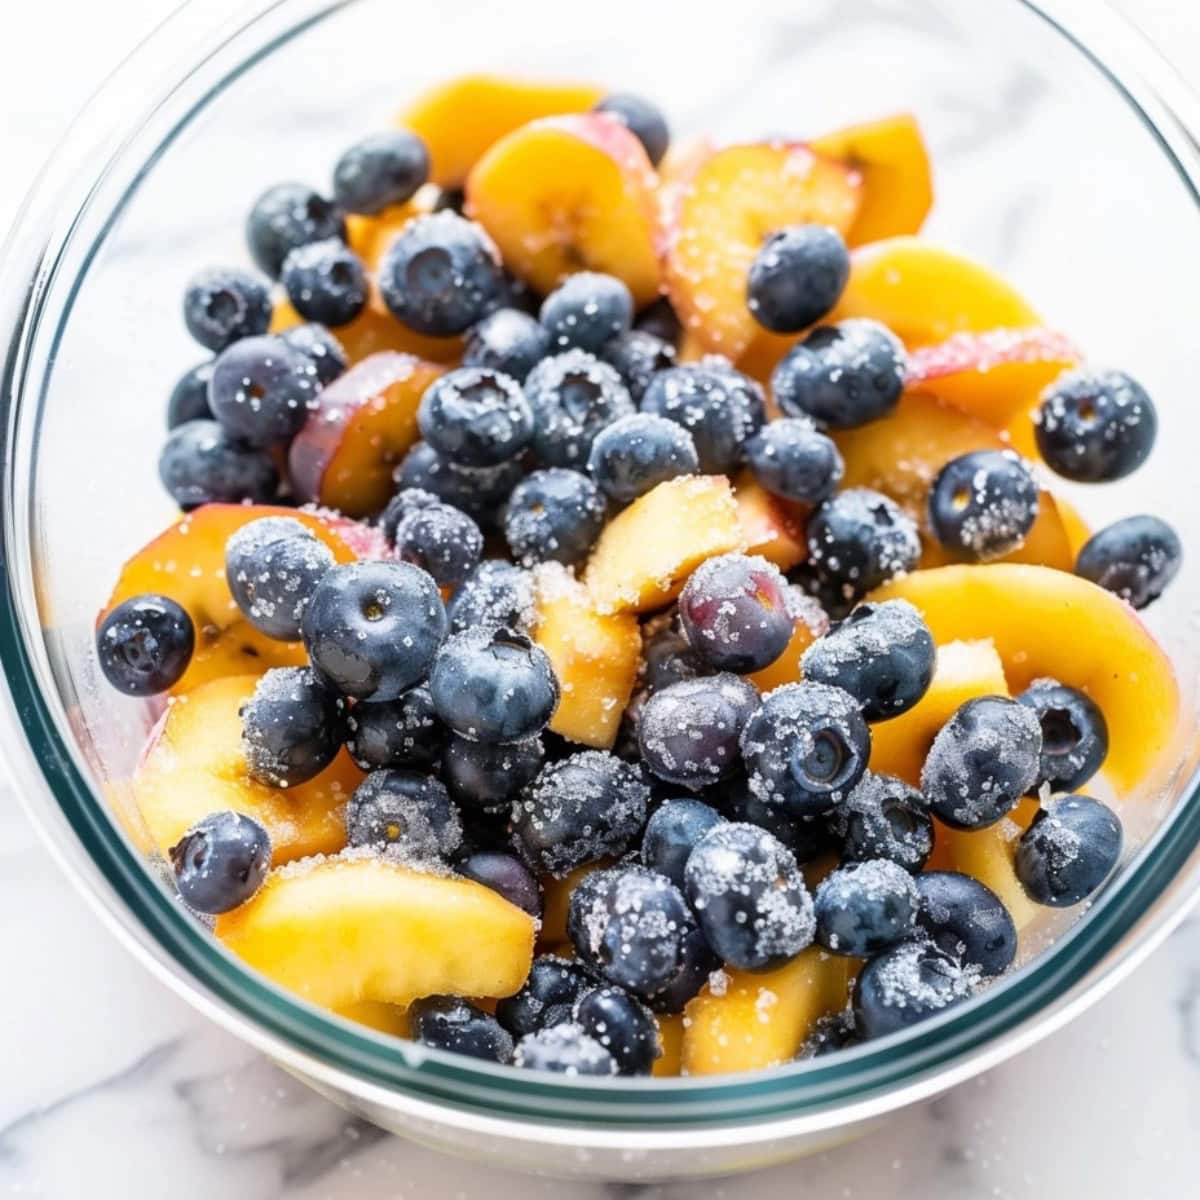 Sliced peaches and blueberries tossed in sugar in a glass bowl.